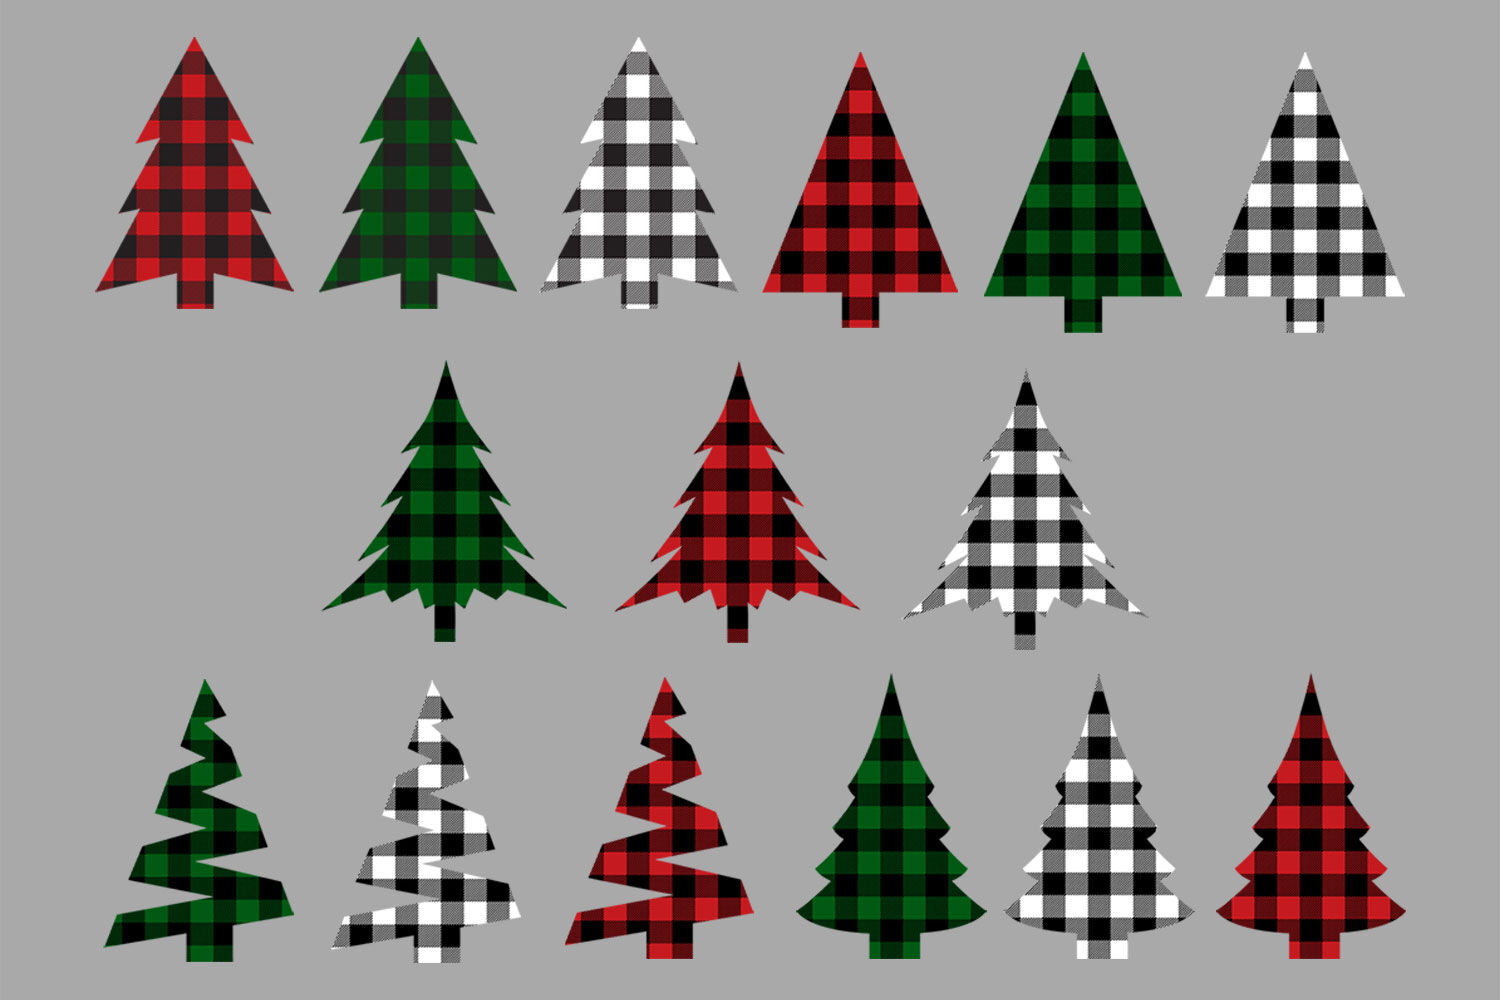 Red Plaid Background Images HD Pictures and Wallpaper For Free Download   Pngtree